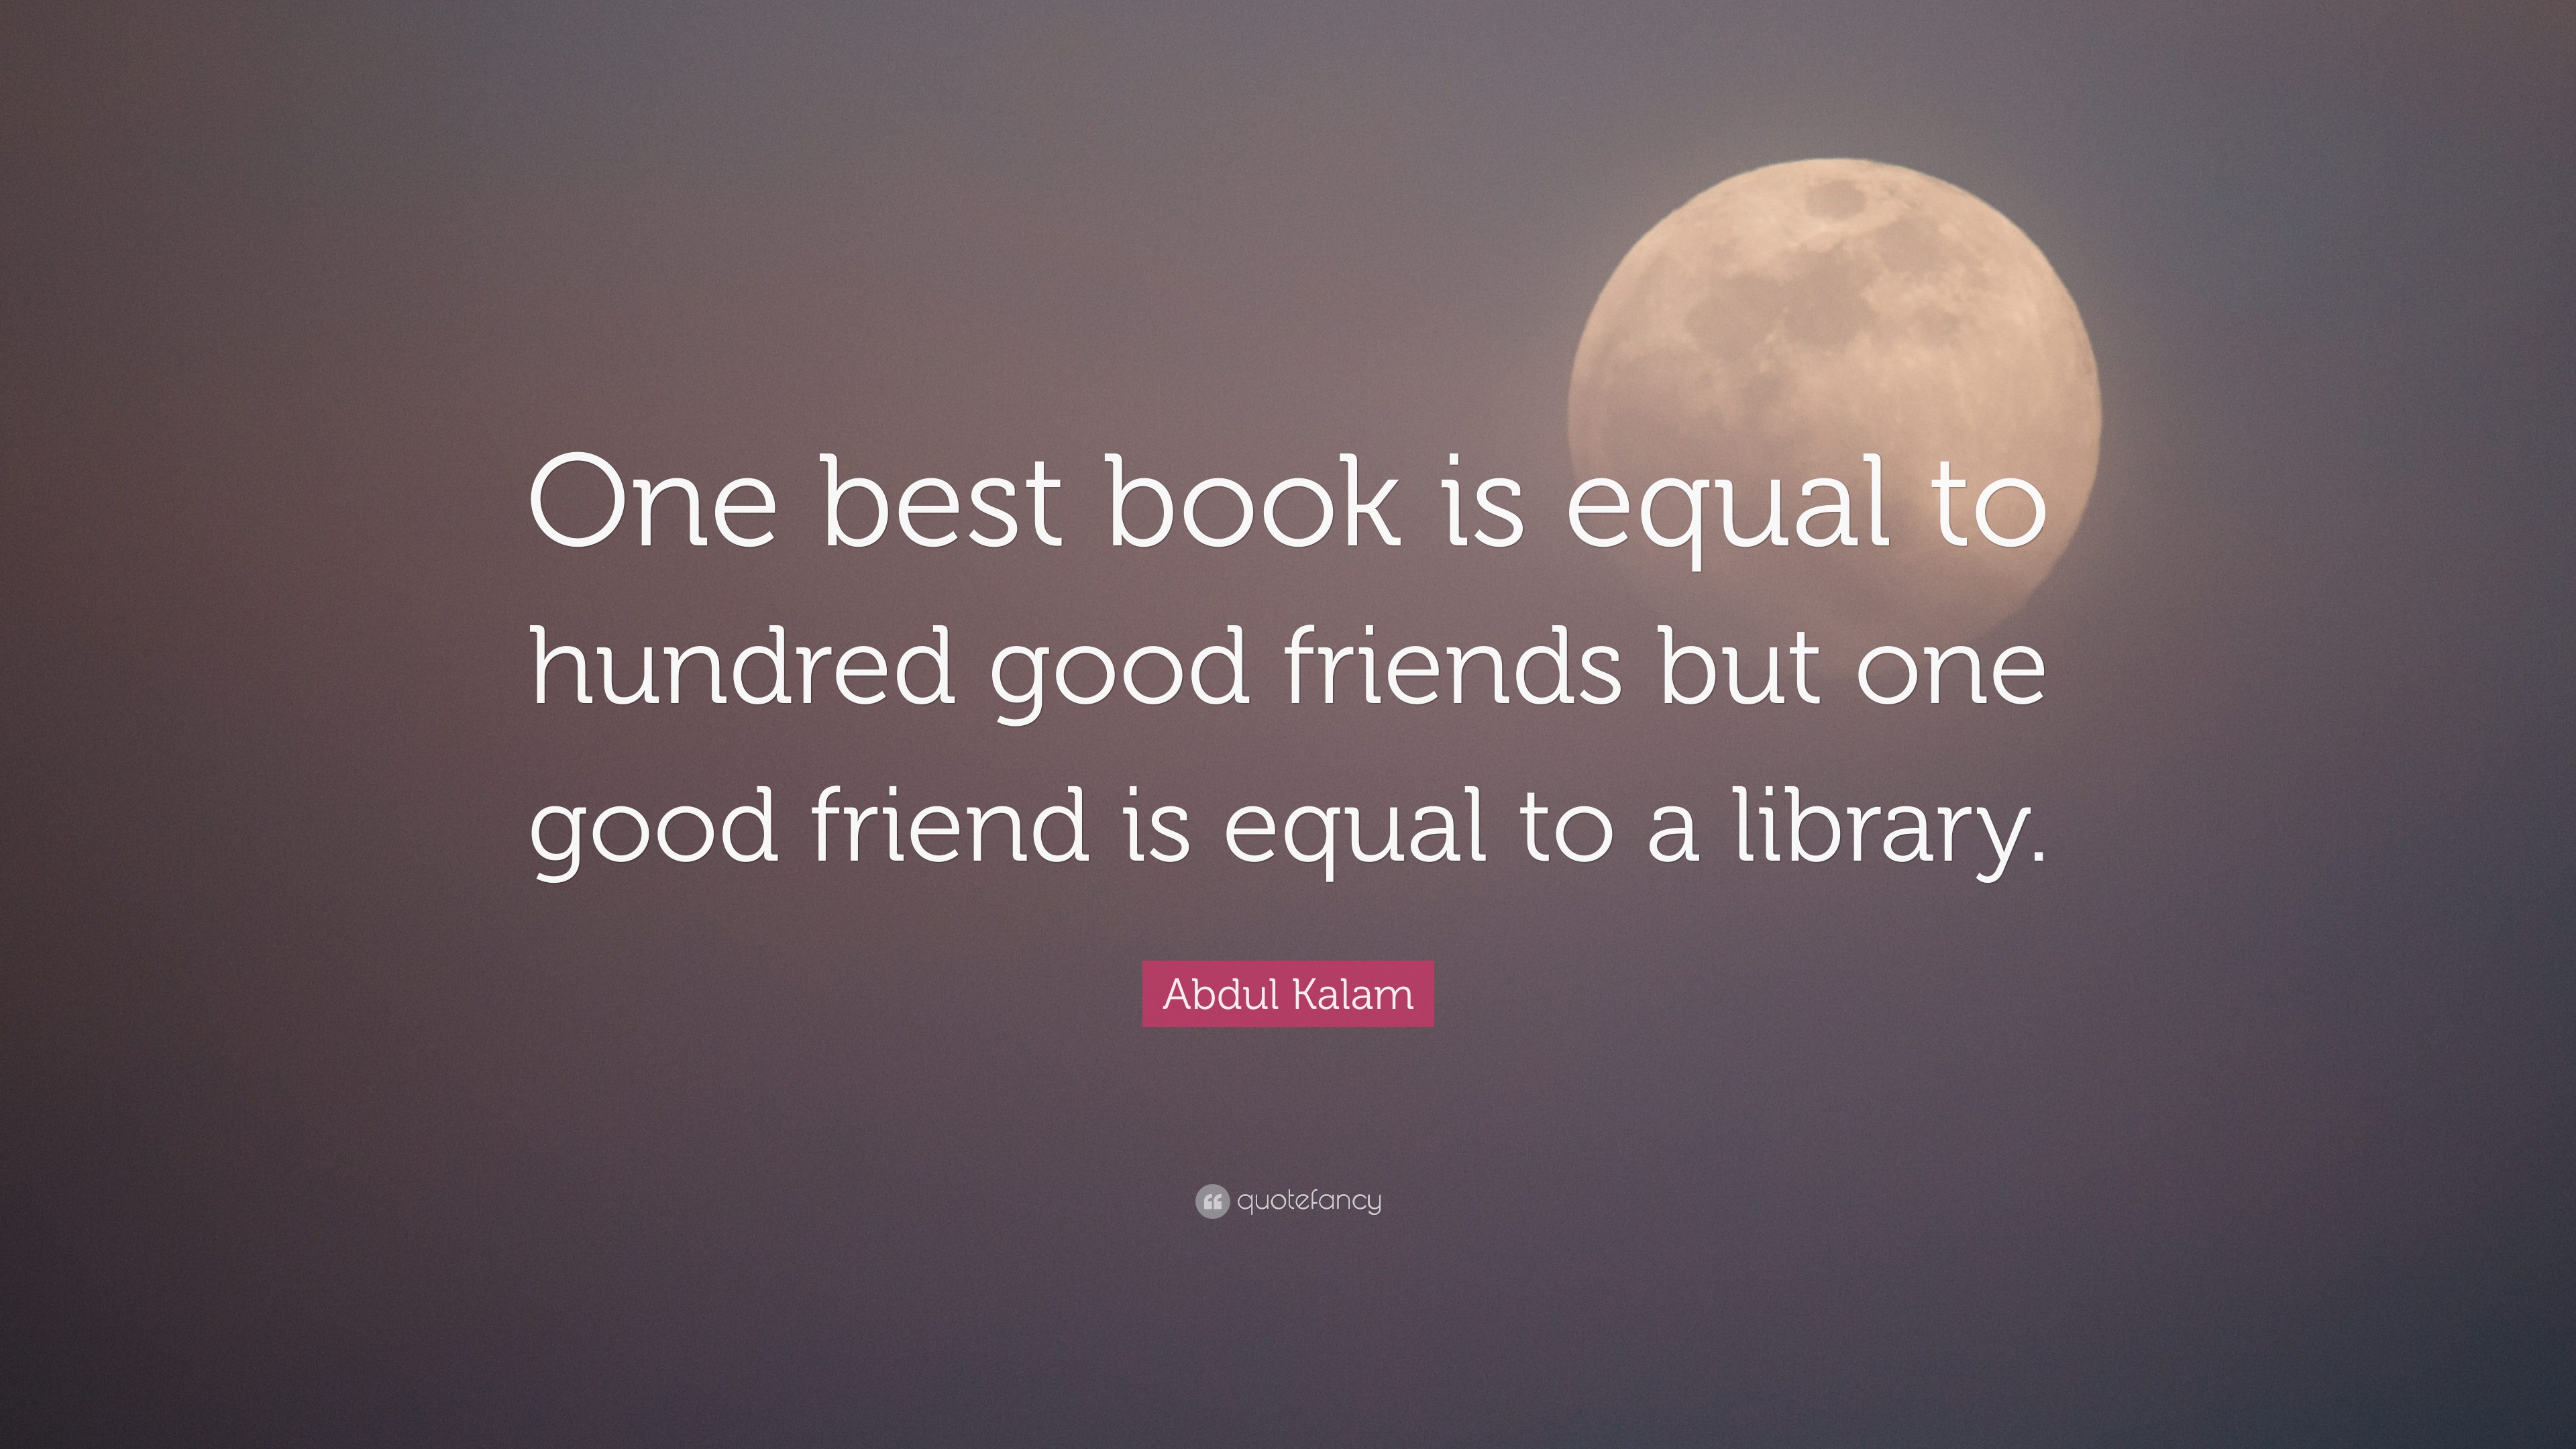 Abdul Kalam Quote: “One best book is equal to hundred good friends but